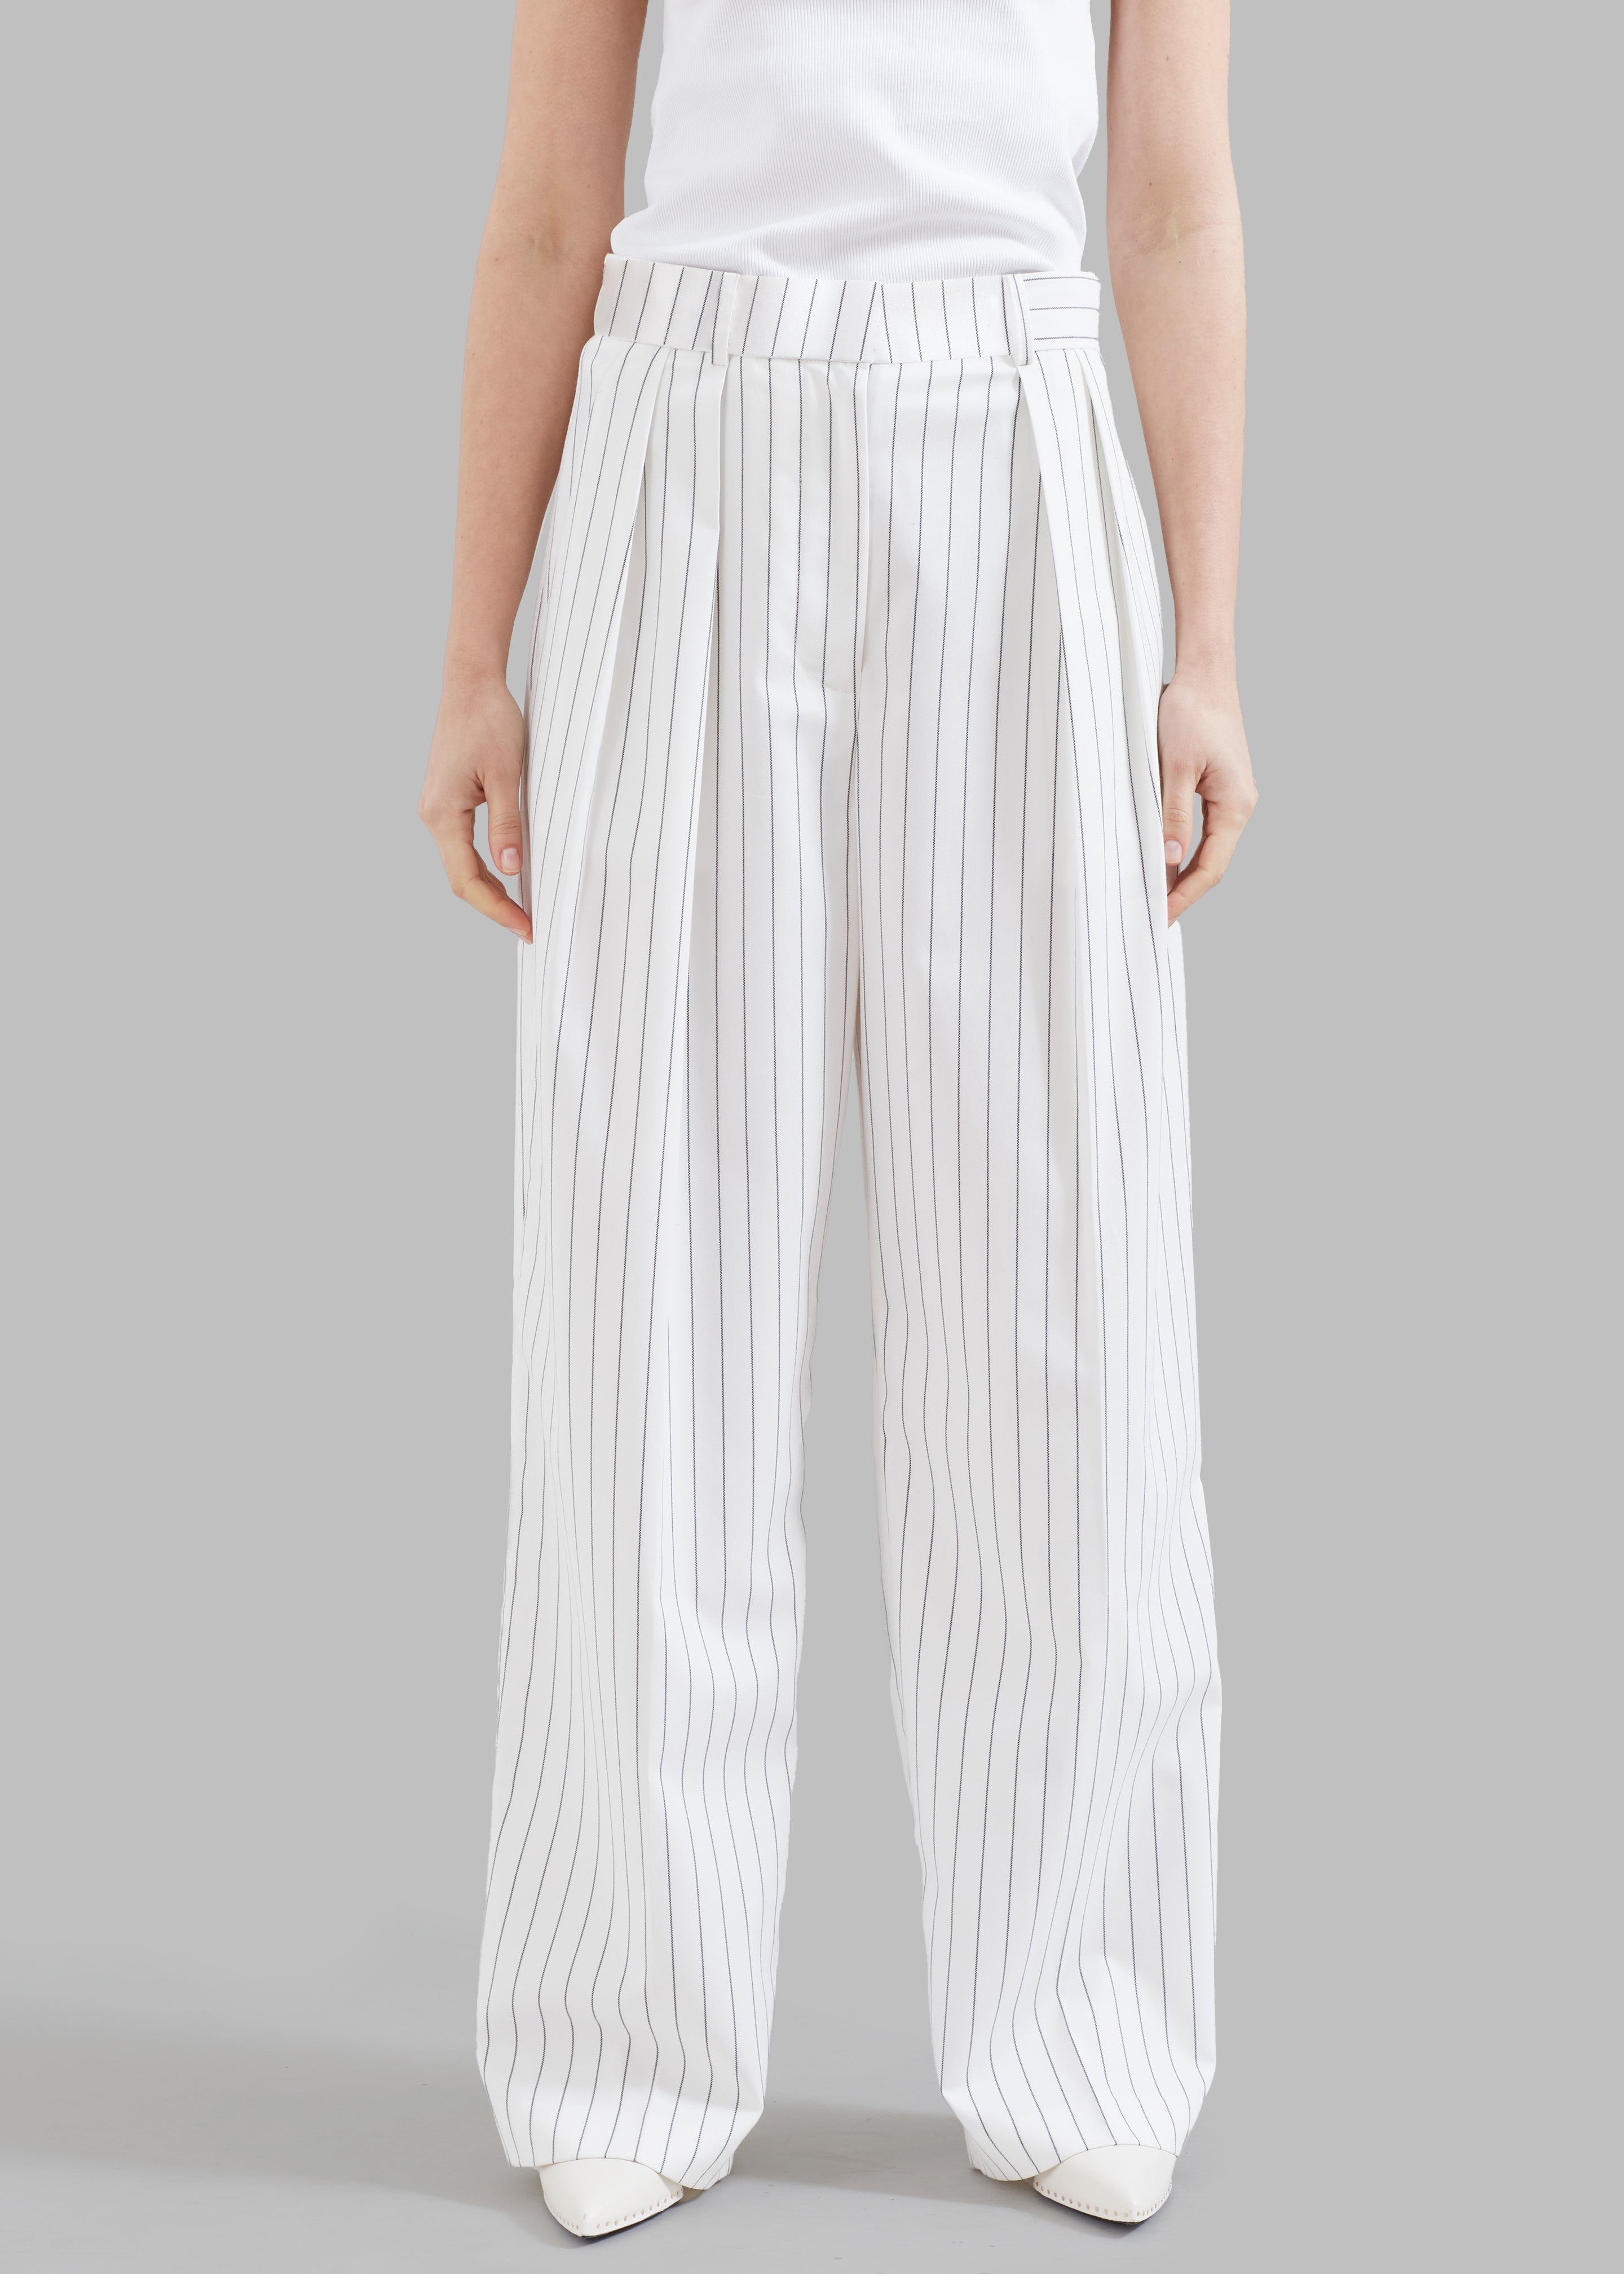 Tansy Fluid Pleated Trousers - White - 4